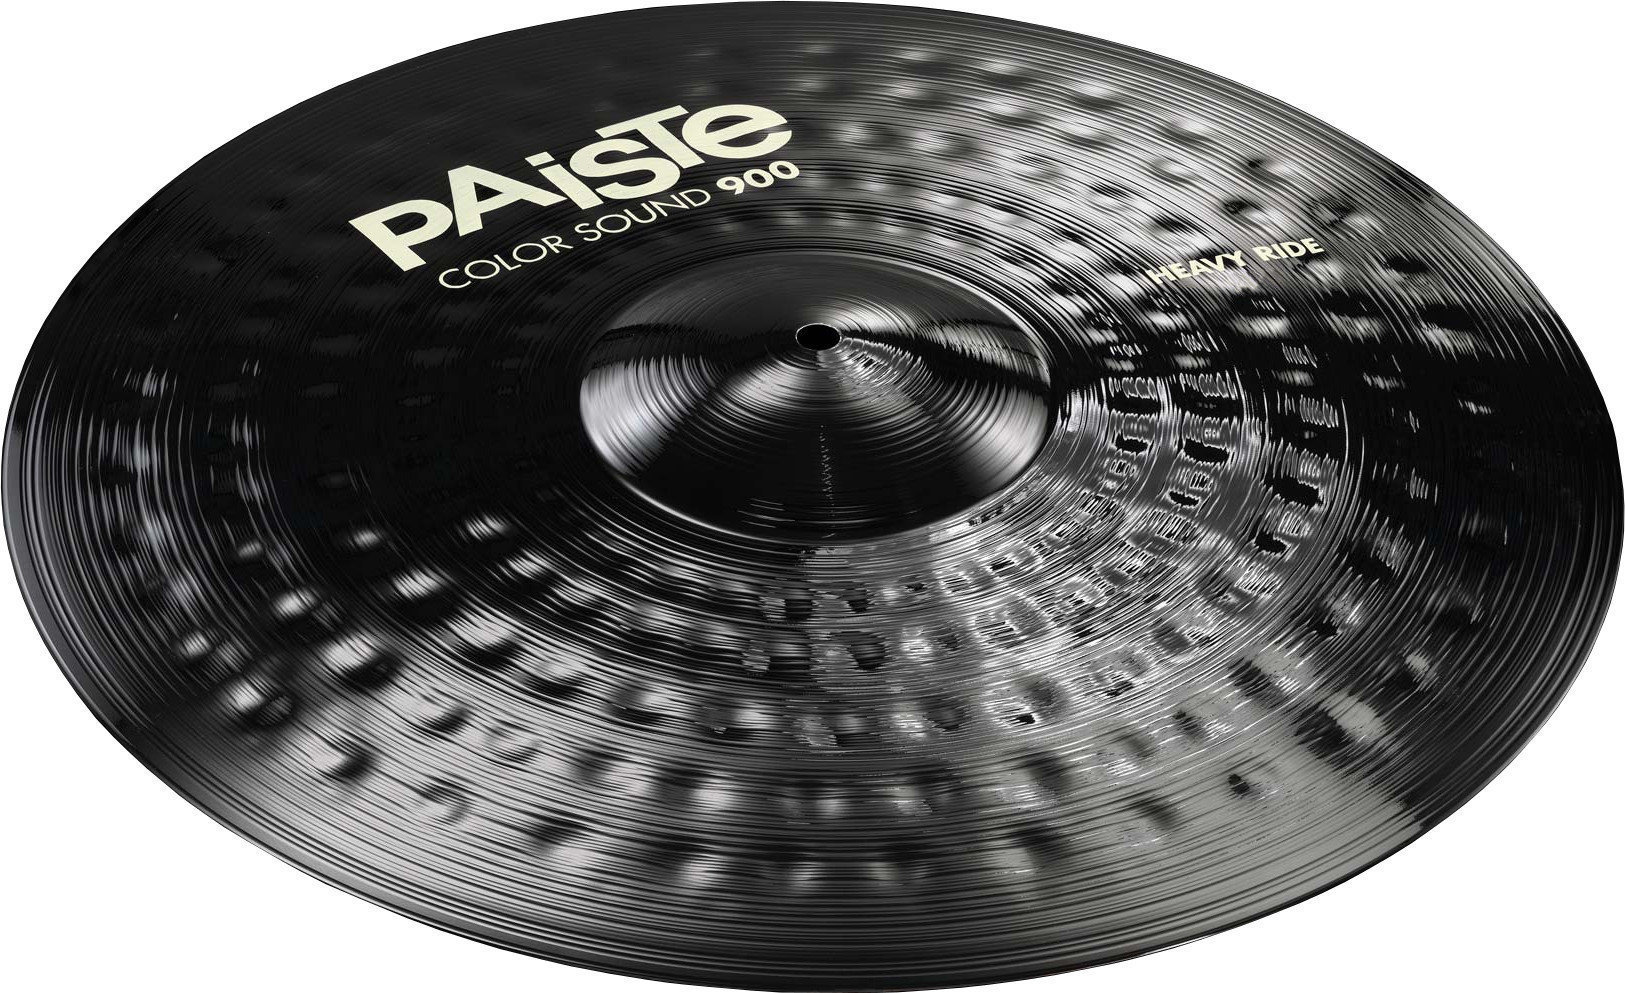 Ride Cymbal Paiste Color Sound 900  Heavy Ride Cymbal 22" Sort